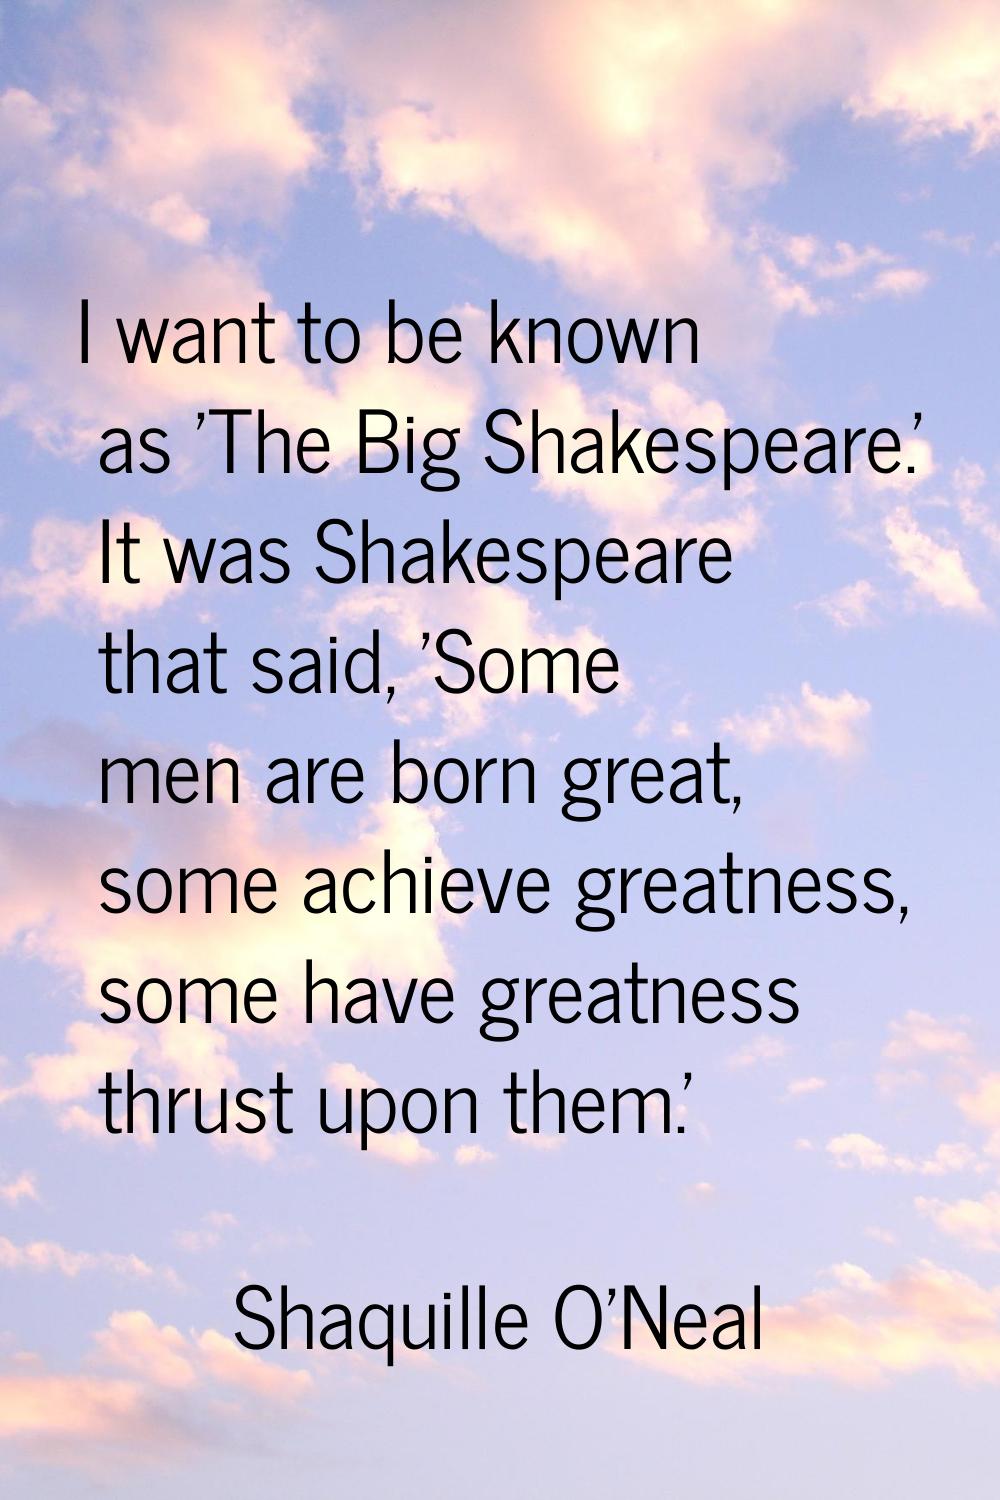 I want to be known as 'The Big Shakespeare.' It was Shakespeare that said, 'Some men are born great